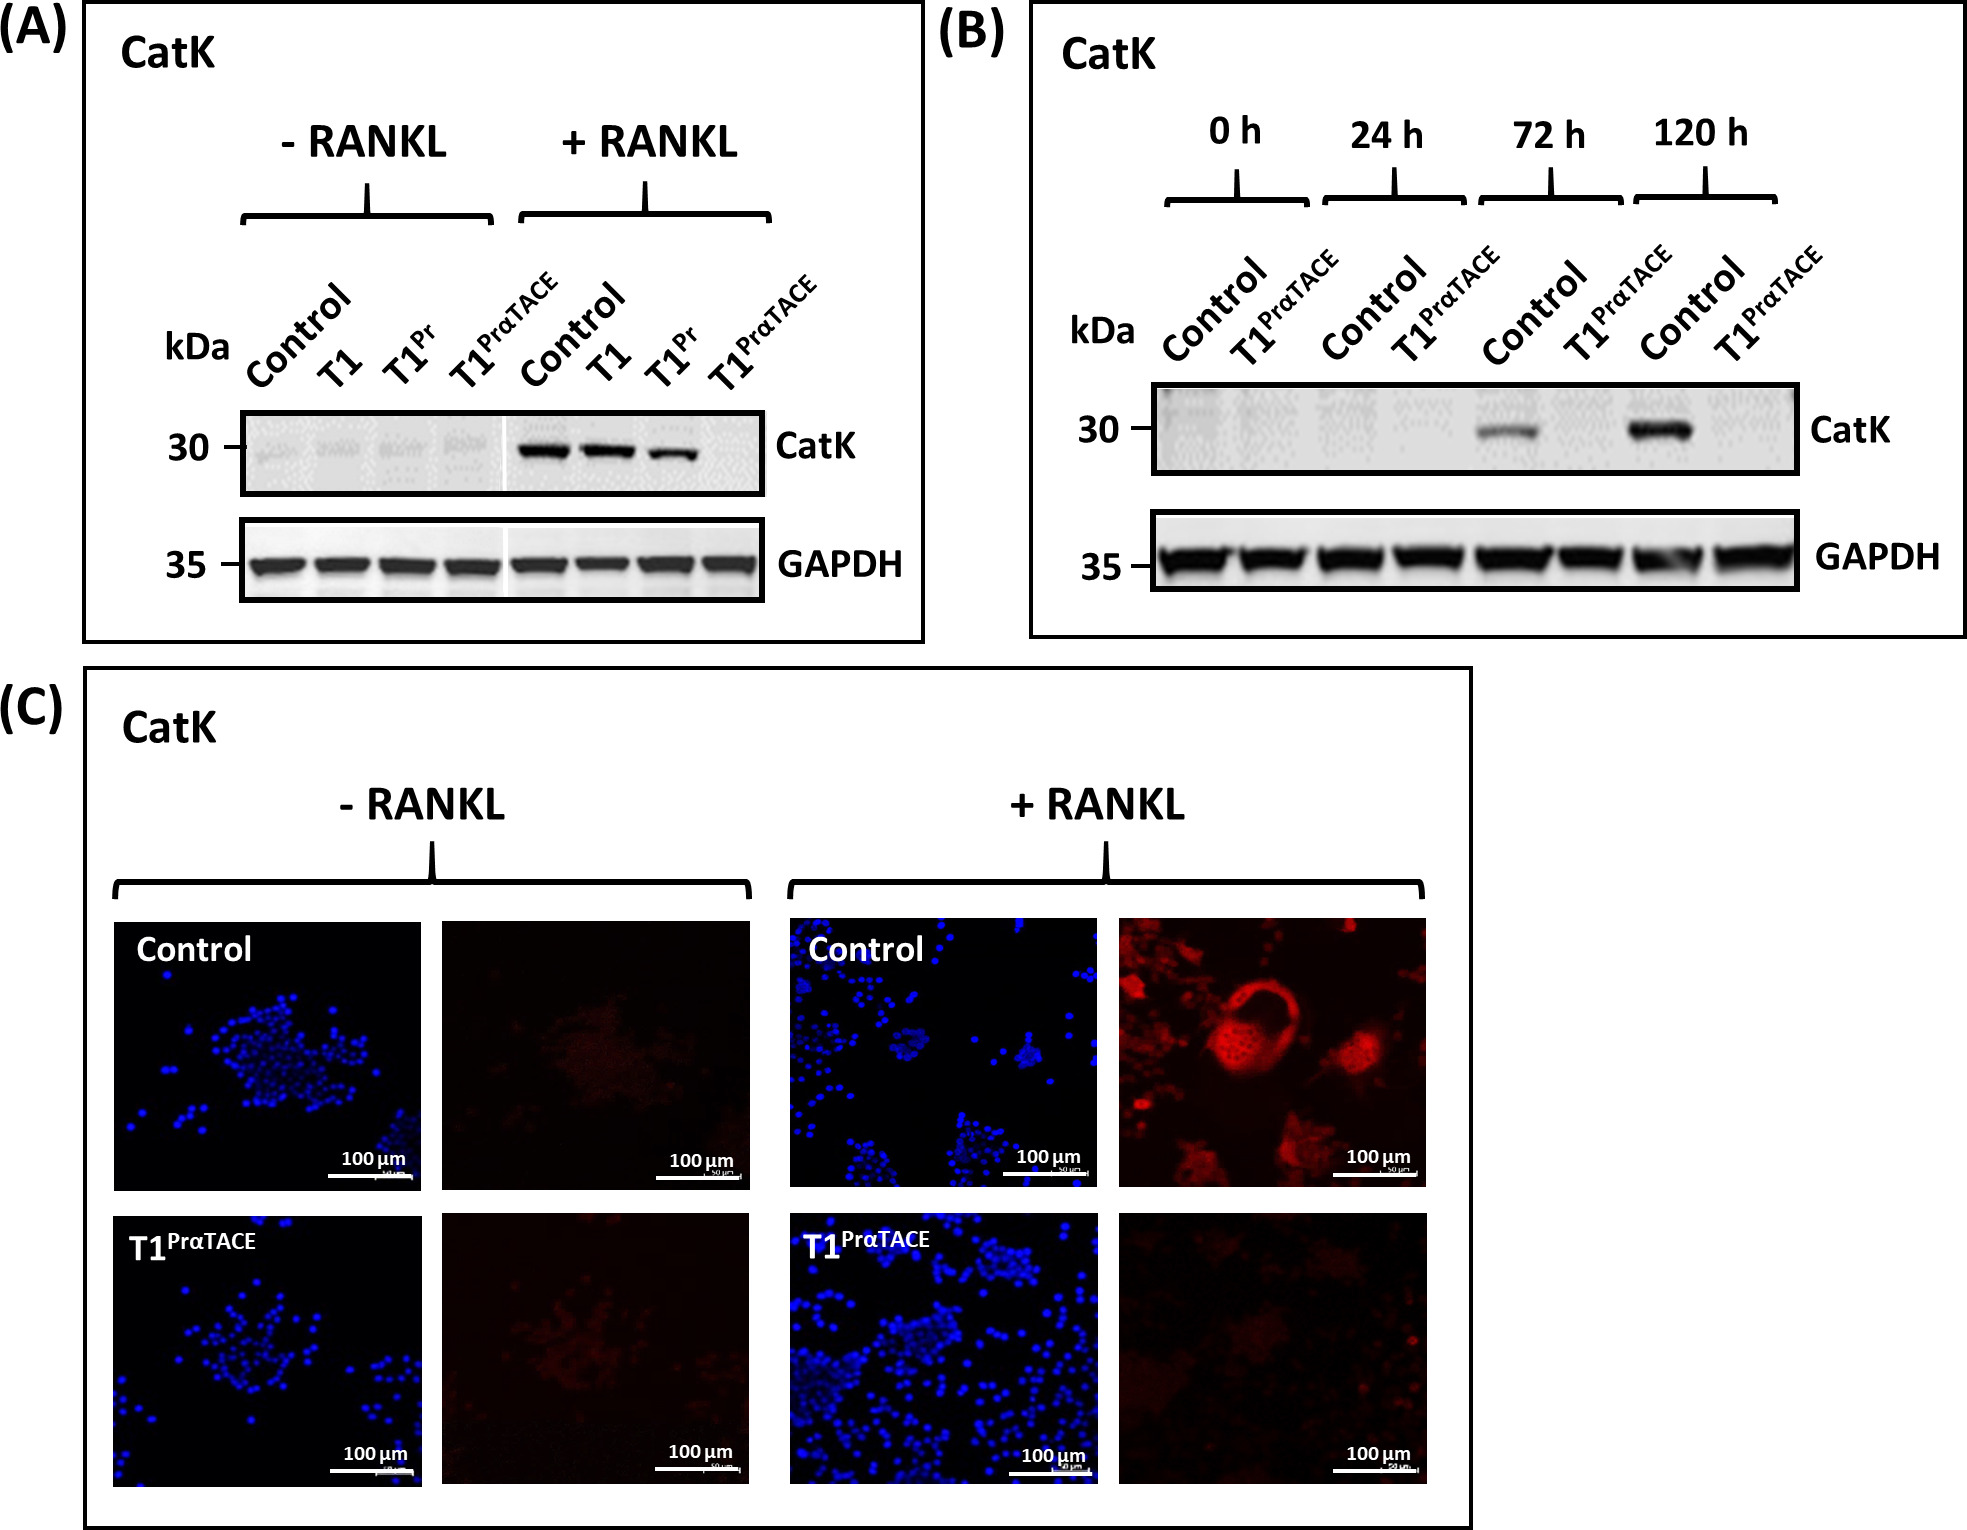 Fig. 5 
            Complete abrogation of cathepsin K (CatK) expression by T1PrαTACE. a) CatK was not detectable in T1PrαTACE as shown by immunoblotting of the cell lysates 120 hours after induction with receptor activator of nuclear factor kappa-Β ligand (RANKL). b) Time course analysis over 120 hours revealed the absence of CatK in T1PrαTACE cells. c) Immunofluorescence (IF) staining shows the absence of CatK in RANKL-induced T1PrαTACE cells (blue: 4′,6-diamidino-2-phenylindole staining of the nucleus; red: IF staining of CatK; ×200 magnification). GAPDH, glyceraldehyde 3-phosphate dehydrogenase.
          